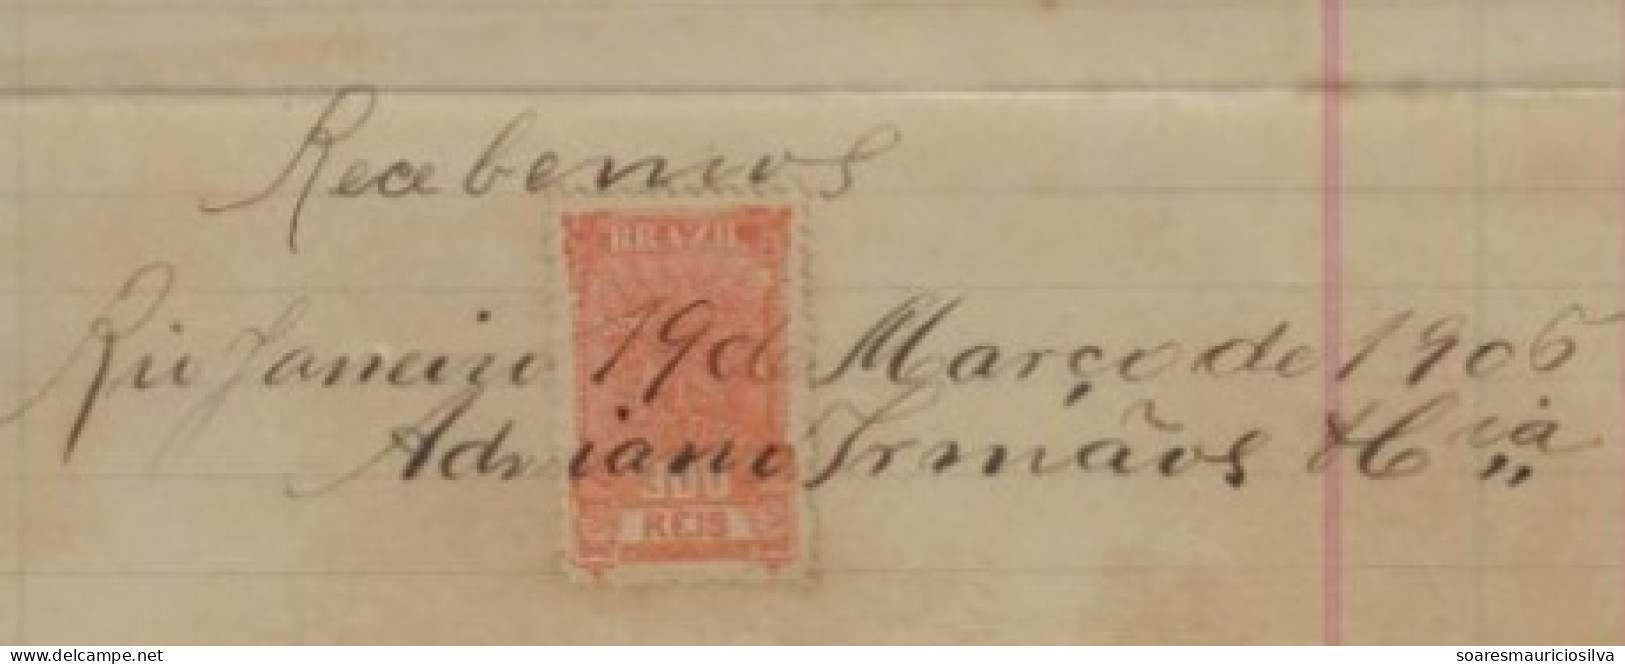 Brazil 1906 Invoice Factory Brushes Dustpans Broomsby Adriano Brothers &Co Rio De Janeiro Federal Treasury Tax Stamp 300 - Lettres & Documents